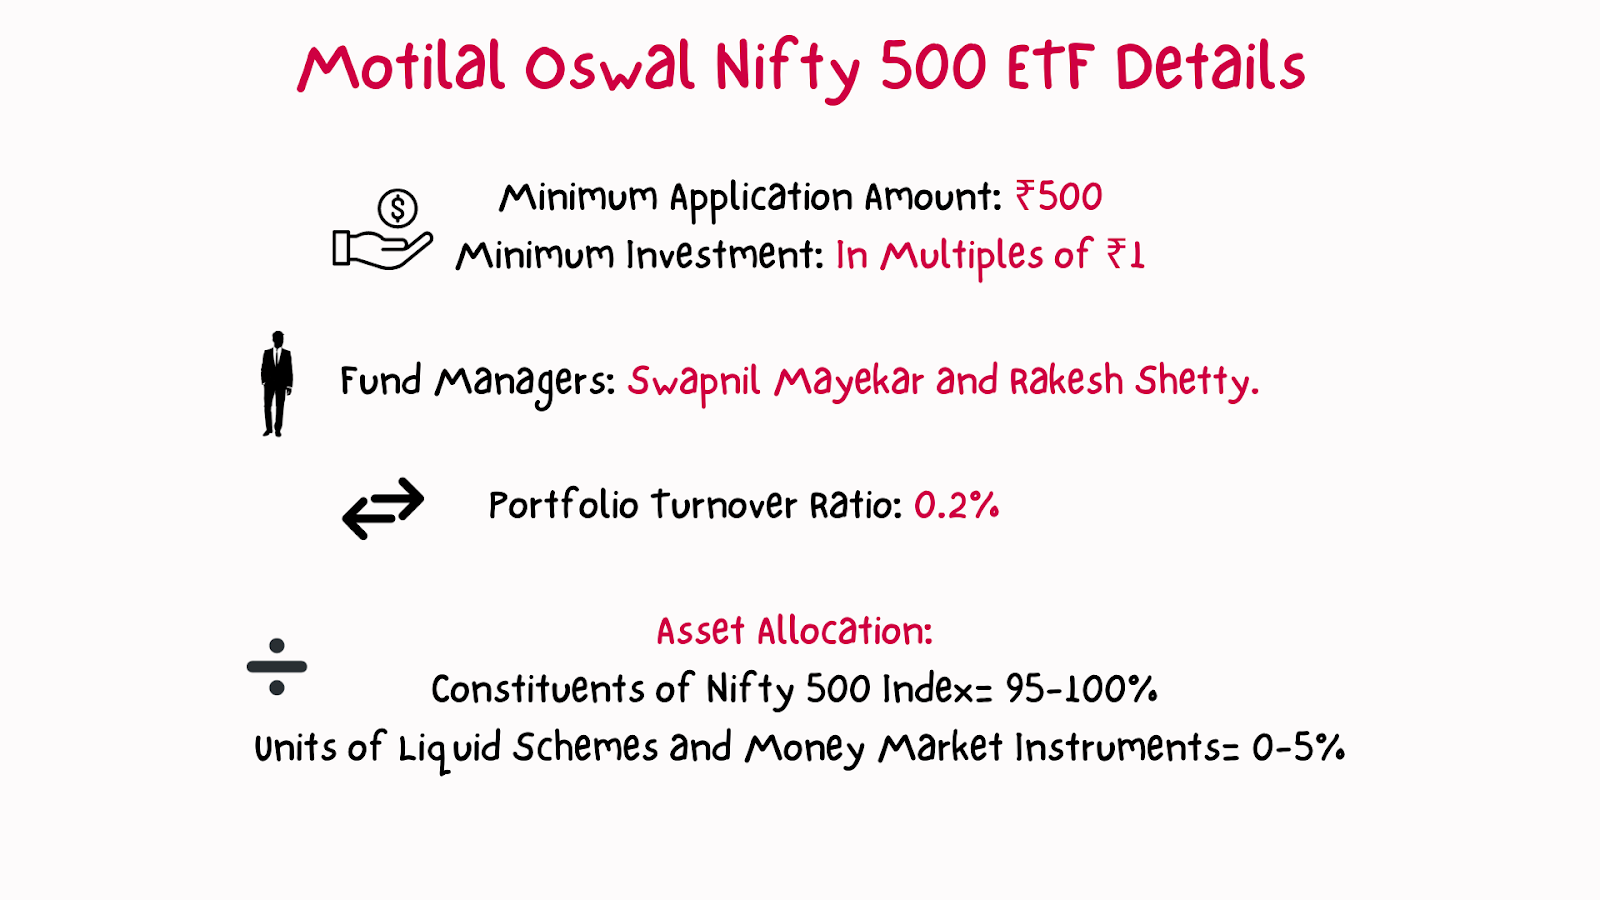 Motital Oswal nifty 500 etf details